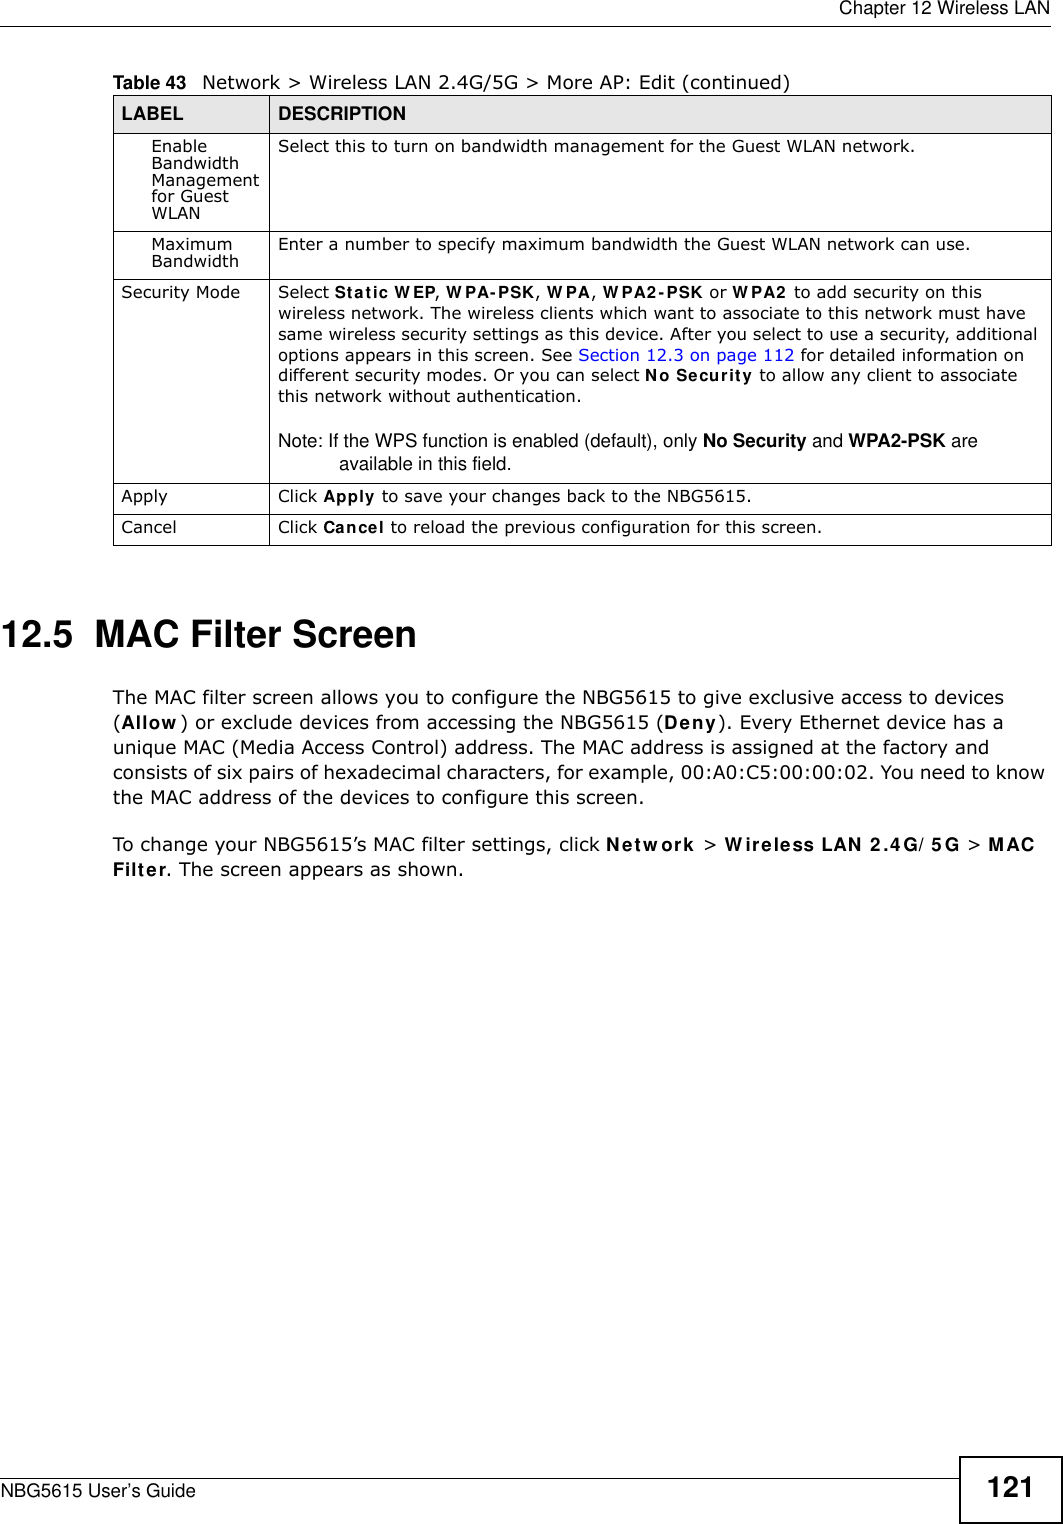  Chapter 12 Wireless LANNBG5615 User’s Guide 12112.5  MAC Filter Screen The MAC filter screen allows you to configure the NBG5615 to give exclusive access to devices (Allow ) or exclude devices from accessing the NBG5615 (Deny). Every Ethernet device has a unique MAC (Media Access Control) address. The MAC address is assigned at the factory and consists of six pairs of hexadecimal characters, for example, 00:A0:C5:00:00:02. You need to know the MAC address of the devices to configure this screen.To change your NBG5615’s MAC filter settings, click Netw ork &gt; W ireless LAN 2 .4 G/ 5 G &gt; MAC Filter. The screen appears as shown.Enable Bandwidth Management for Guest WLAN Select this to turn on bandwidth management for the Guest WLAN network.Maximum Bandwidth  Enter a number to specify maximum bandwidth the Guest WLAN network can use.Security Mode Select Static W EP, W PA- PSK, W PA, W PA2 -PSK or W PA2  to add security on this wireless network. The wireless clients which want to associate to this network must have same wireless security settings as this device. After you select to use a security, additional options appears in this screen. See Section 12.3 on page 112 for detailed information on different security modes. Or you can select No Security to allow any client to associate this network without authentication.Note: If the WPS function is enabled (default), only No Security and WPA2-PSK are available in this field.Apply Click Apply to save your changes back to the NBG5615.Cancel Click Cancel to reload the previous configuration for this screen.Table 43   Network &gt; Wireless LAN 2.4G/5G &gt; More AP: Edit (continued)LABEL DESCRIPTION